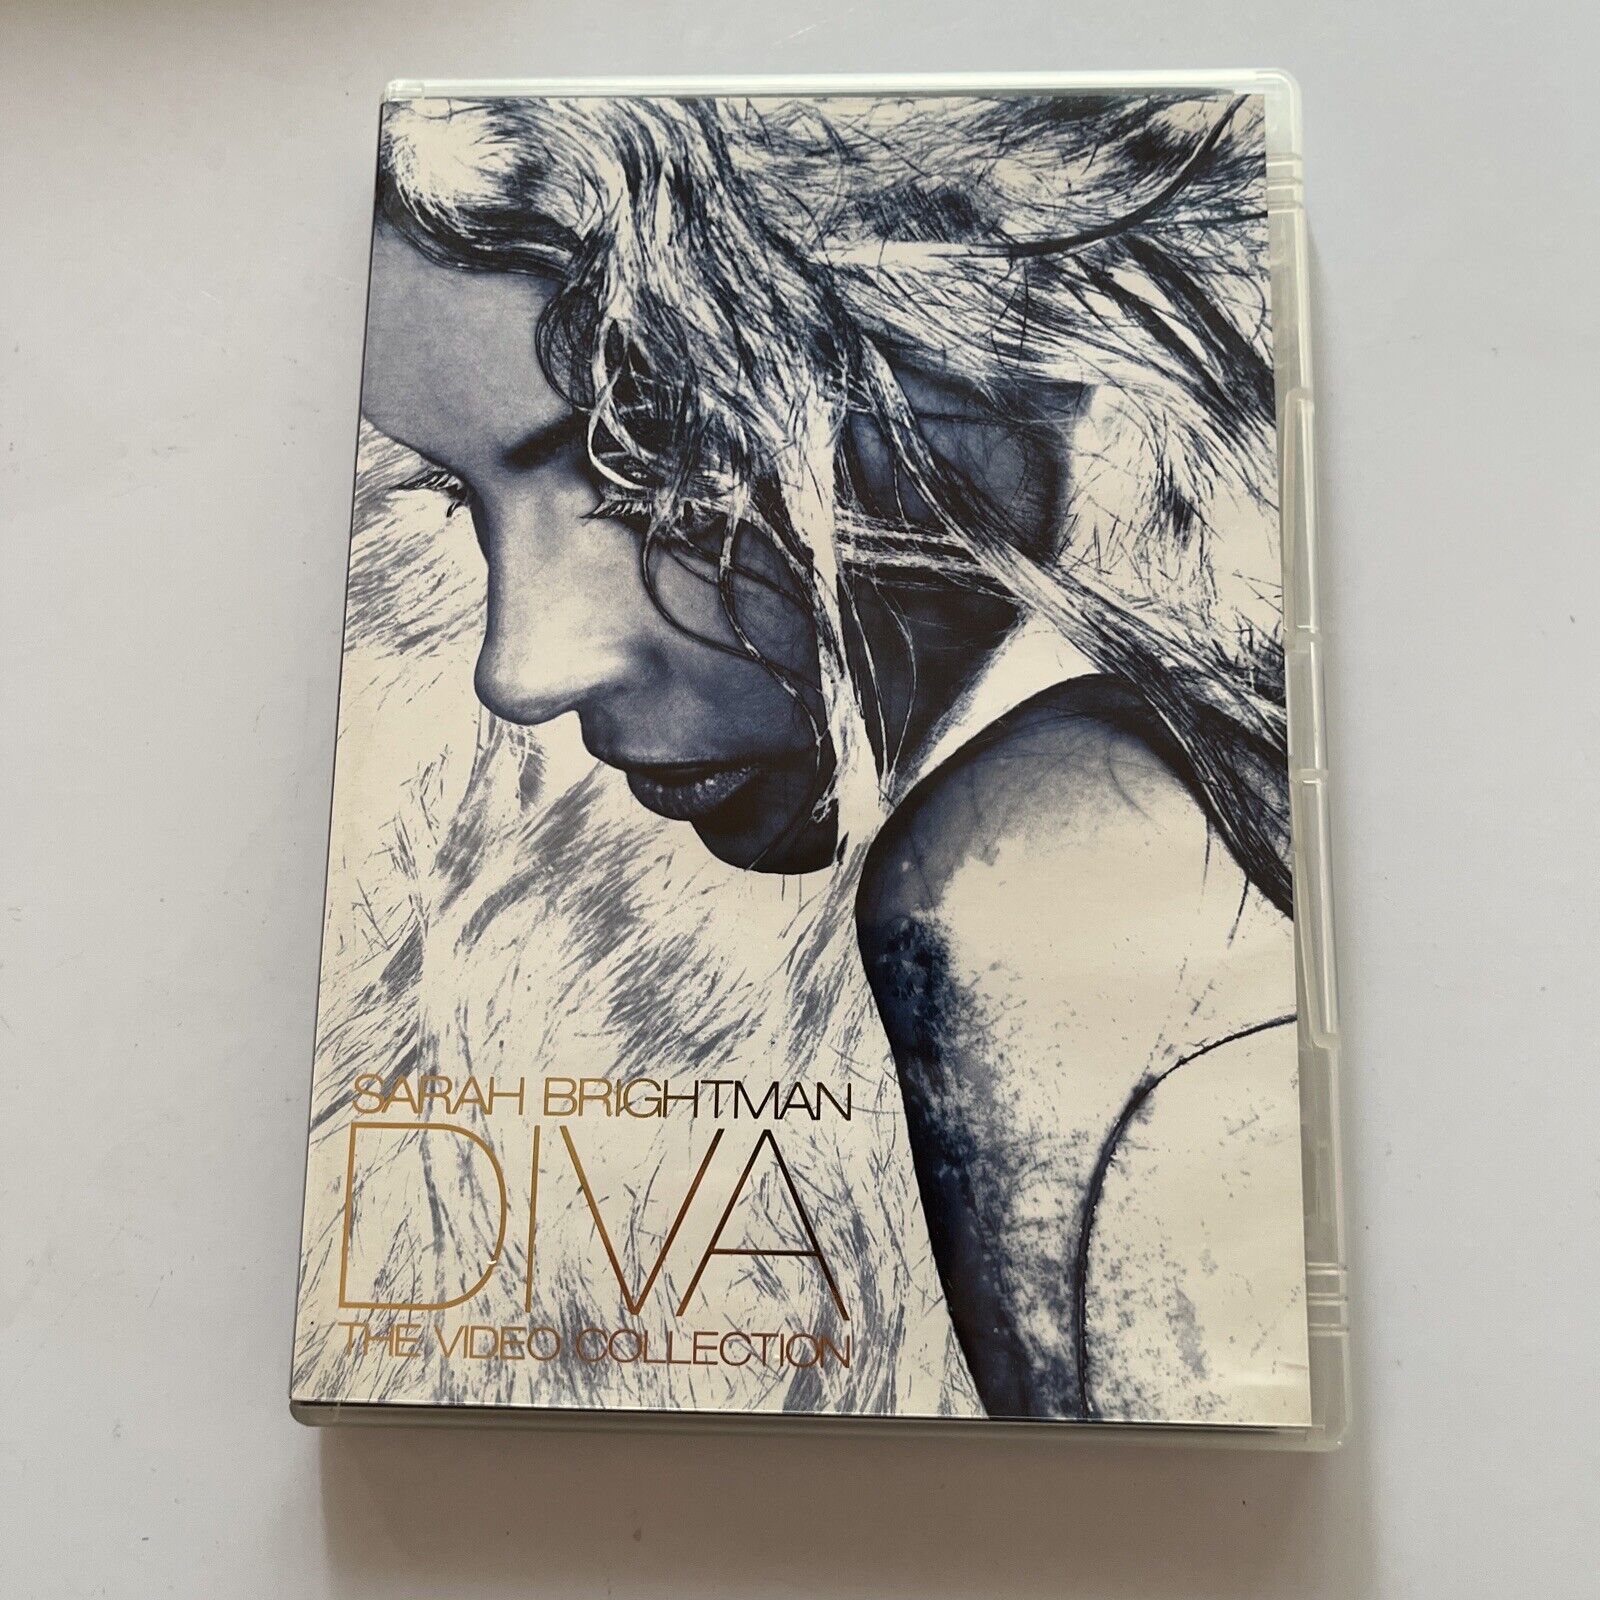 Sarah Brightman - DIVA The Video Collection (DVD, 2006) NEW All Region ...